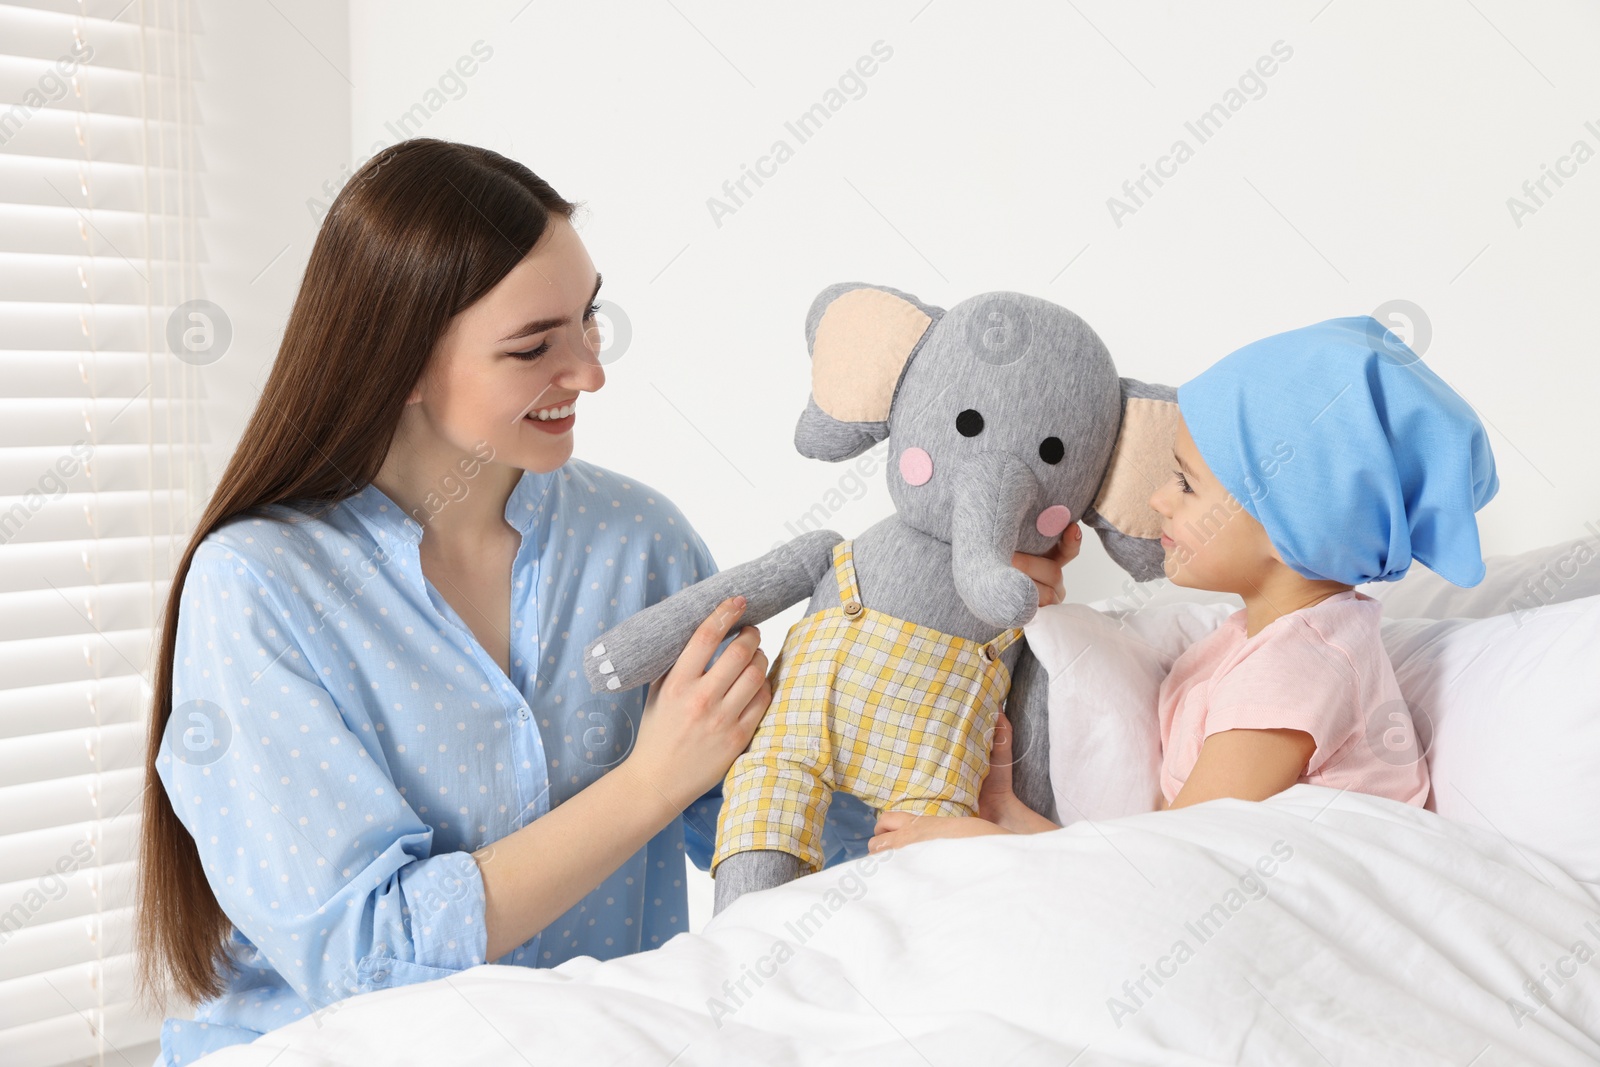 Photo of Childhood cancer. Mother and daughter with toy elephant in hospital